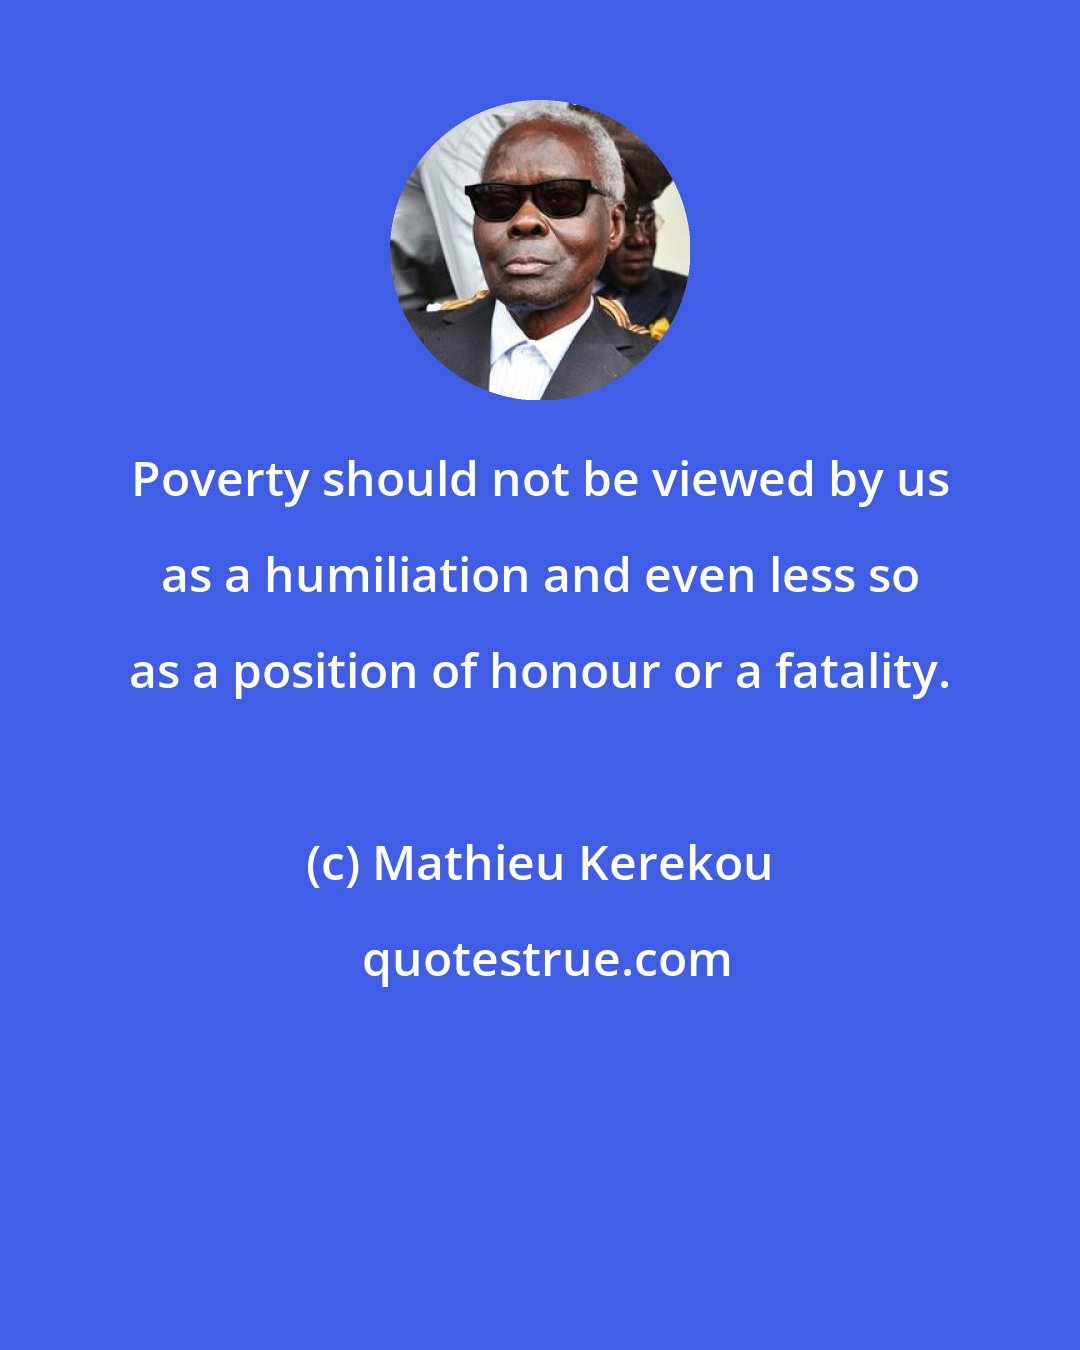 Mathieu Kerekou: Poverty should not be viewed by us as a humiliation and even less so as a position of honour or a fatality.